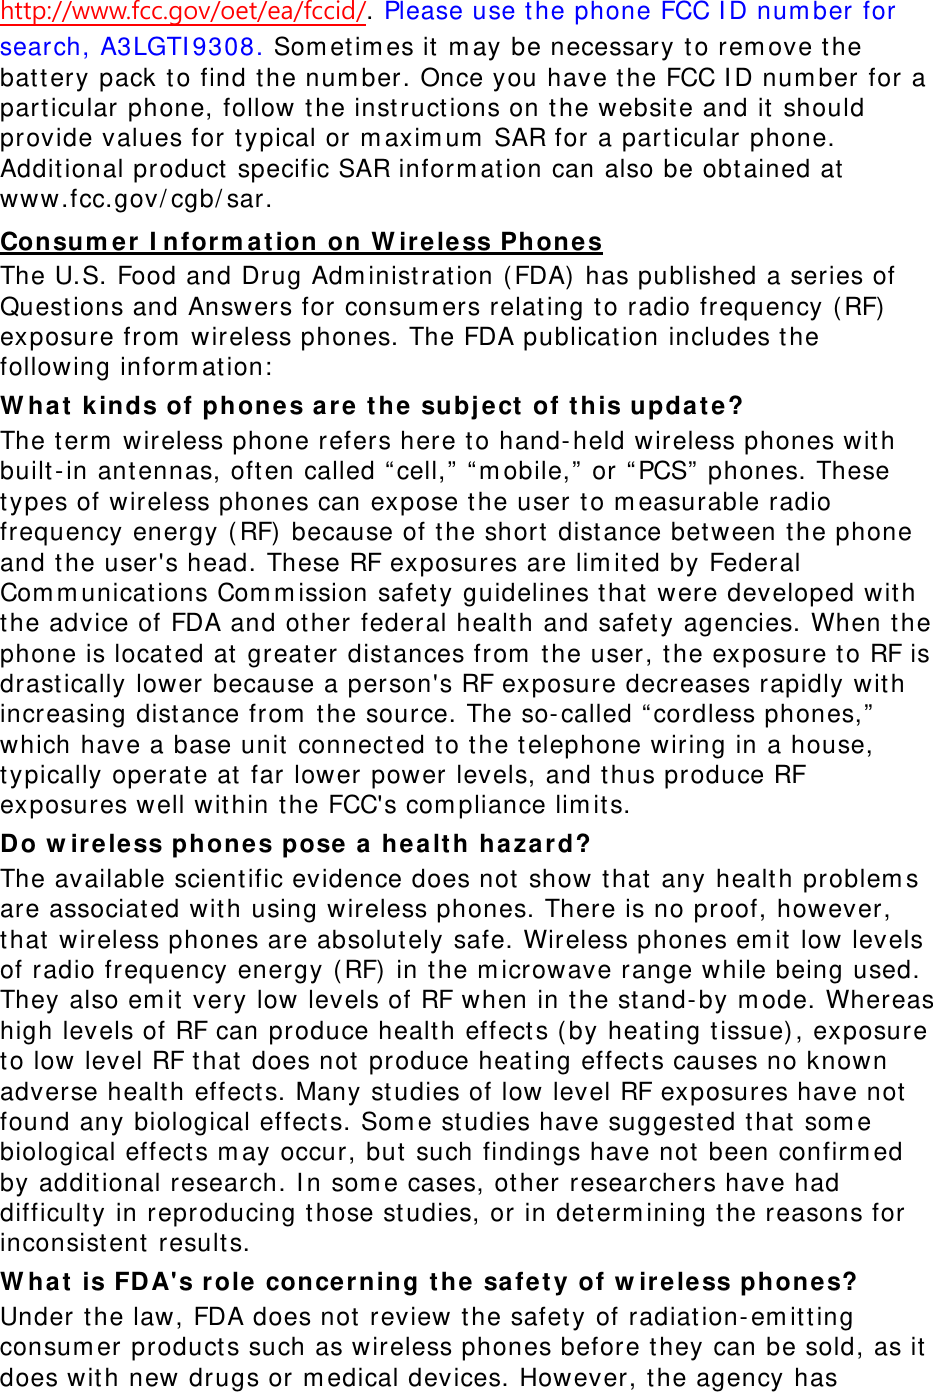 http://www.fcc.gov/oet/ea/fccid/. Please use the phone FCC I D num ber for search, A3LGTI 9308. Som et im es it m ay be necessary to rem ove the batt ery pack to find t he num ber. Once you have t he FCC I D num ber for a particular phone, follow t he inst ruct ions on t he website and it  should provide values for t ypical or m axim um  SAR for a particular phone. Additional product  specific SAR inform ation can also be obtained at www.fcc.gov/ cgb/ sar. Consum er I nform at ion on W ir eless Phon es The U.S. Food and Drug Adm inist ration ( FDA)  has published a series of Quest ions and Answers for consum ers relating t o radio frequency ( RF)  exposure from  wireless phones. The FDA publication includes the following inform ation:  W ha t  k inds of phones ar e t he  subj ect  of t his updat e? The t erm  wireless phone refers here to hand- held wireless phones with built - in antennas, oft en called “ cell,”  “ m obile,” or “ PCS”  phones. These types of wireless phones can expose t he user t o m easurable radio frequency energy ( RF)  because of t he short  distance between t he phone and t he user&apos;s head. These RF exposures are lim it ed by Federal Com m unications Com m ission safety guidelines t hat were developed with the advice of FDA and ot her federal healt h and safet y agencies. When the phone is located at great er dist ances from  t he user, the exposure to RF is drast ically lower because a person&apos;s RF exposure decreases rapidly with increasing dist ance from  t he source. The so- called “ cordless phones,”  which have a base unit connect ed t o the telephone wiring in a house, typically operate at  far lower power levels, and t hus produce RF exposures well within t he FCC&apos;s com pliance lim it s. Do w ire less phones pose  a  he a lt h ha za rd? The available scientific evidence does not show that any health problem s are associated with using wireless phones. There is no proof, however, that wireless phones are absolut ely safe. Wireless phones em it low levels of radio frequency energy ( RF)  in t he m icrowave range while being used. They also em it very low levels of RF when in the st and-by m ode. Whereas high levels of RF can produce healt h effect s (by heating t issue), exposure to low level RF that does not produce heating effect s causes no known adverse healt h effect s. Many st udies of low level RF exposures have not found any biological effect s. Som e st udies have suggest ed t hat som e biological effect s m ay occur, but  such findings have not  been confirm ed by additional research. I n som e cases, other researchers have had difficulty in reproducing t hose st udies, or in det erm ining t he reasons for inconsist ent  results. W ha t  is FD A&apos;s r ole concerning t he sa fet y of w ir eless phones? Under the law, FDA does not review the safet y of radiat ion- em it ting consum er product s such as wireless phones before they can be sold, as it  does with new drugs or m edical devices. However, the agency has 